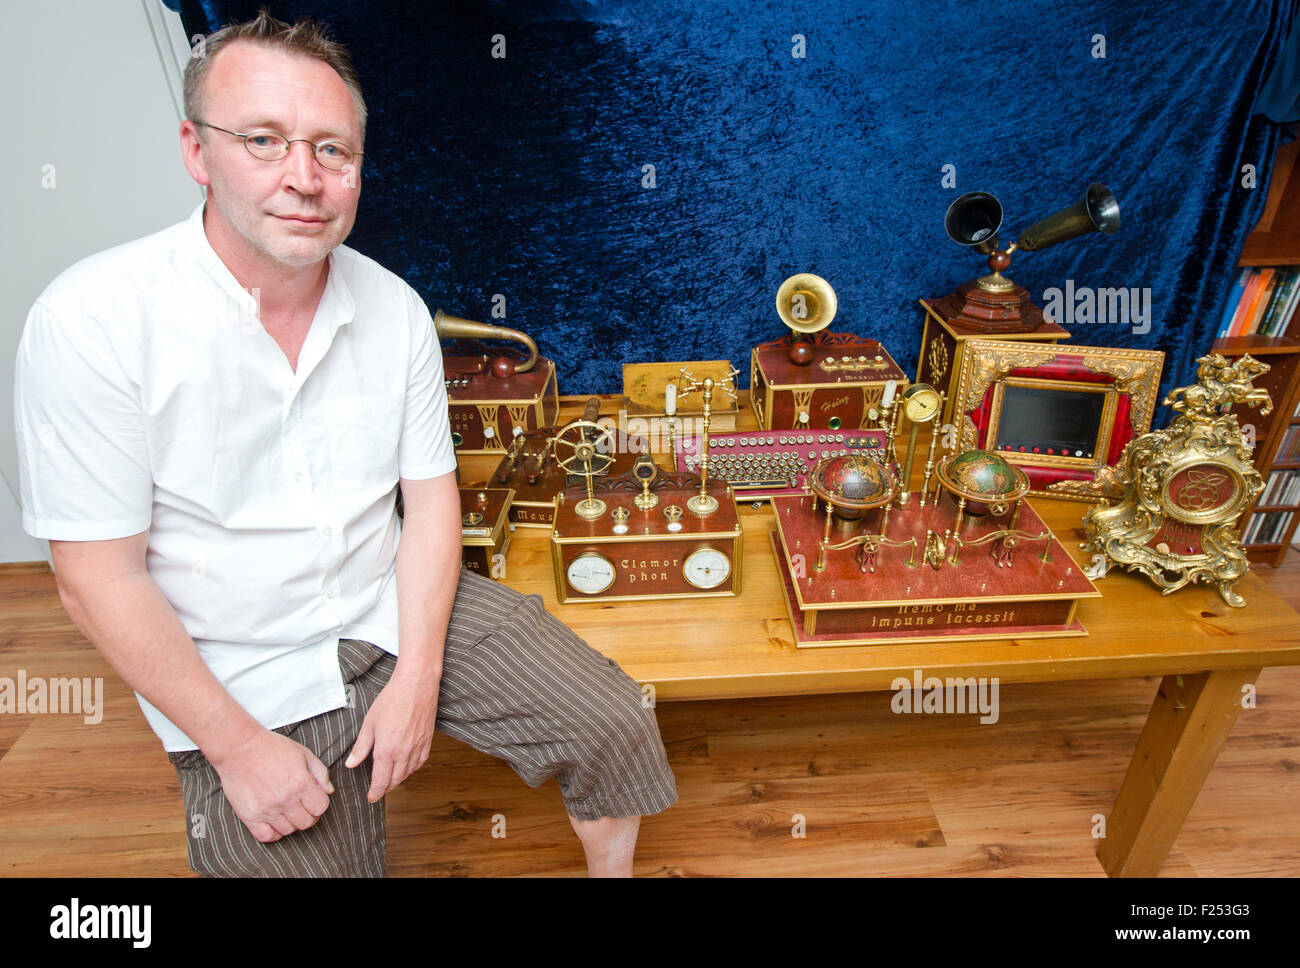 Inventor Joachim Buff with some of his creations in Frankfurt am Main,  Germany, 25 August 2015. The hobby is referred to as Steampunk and combines  an historical aesthetic with modern technology. PHOTO: